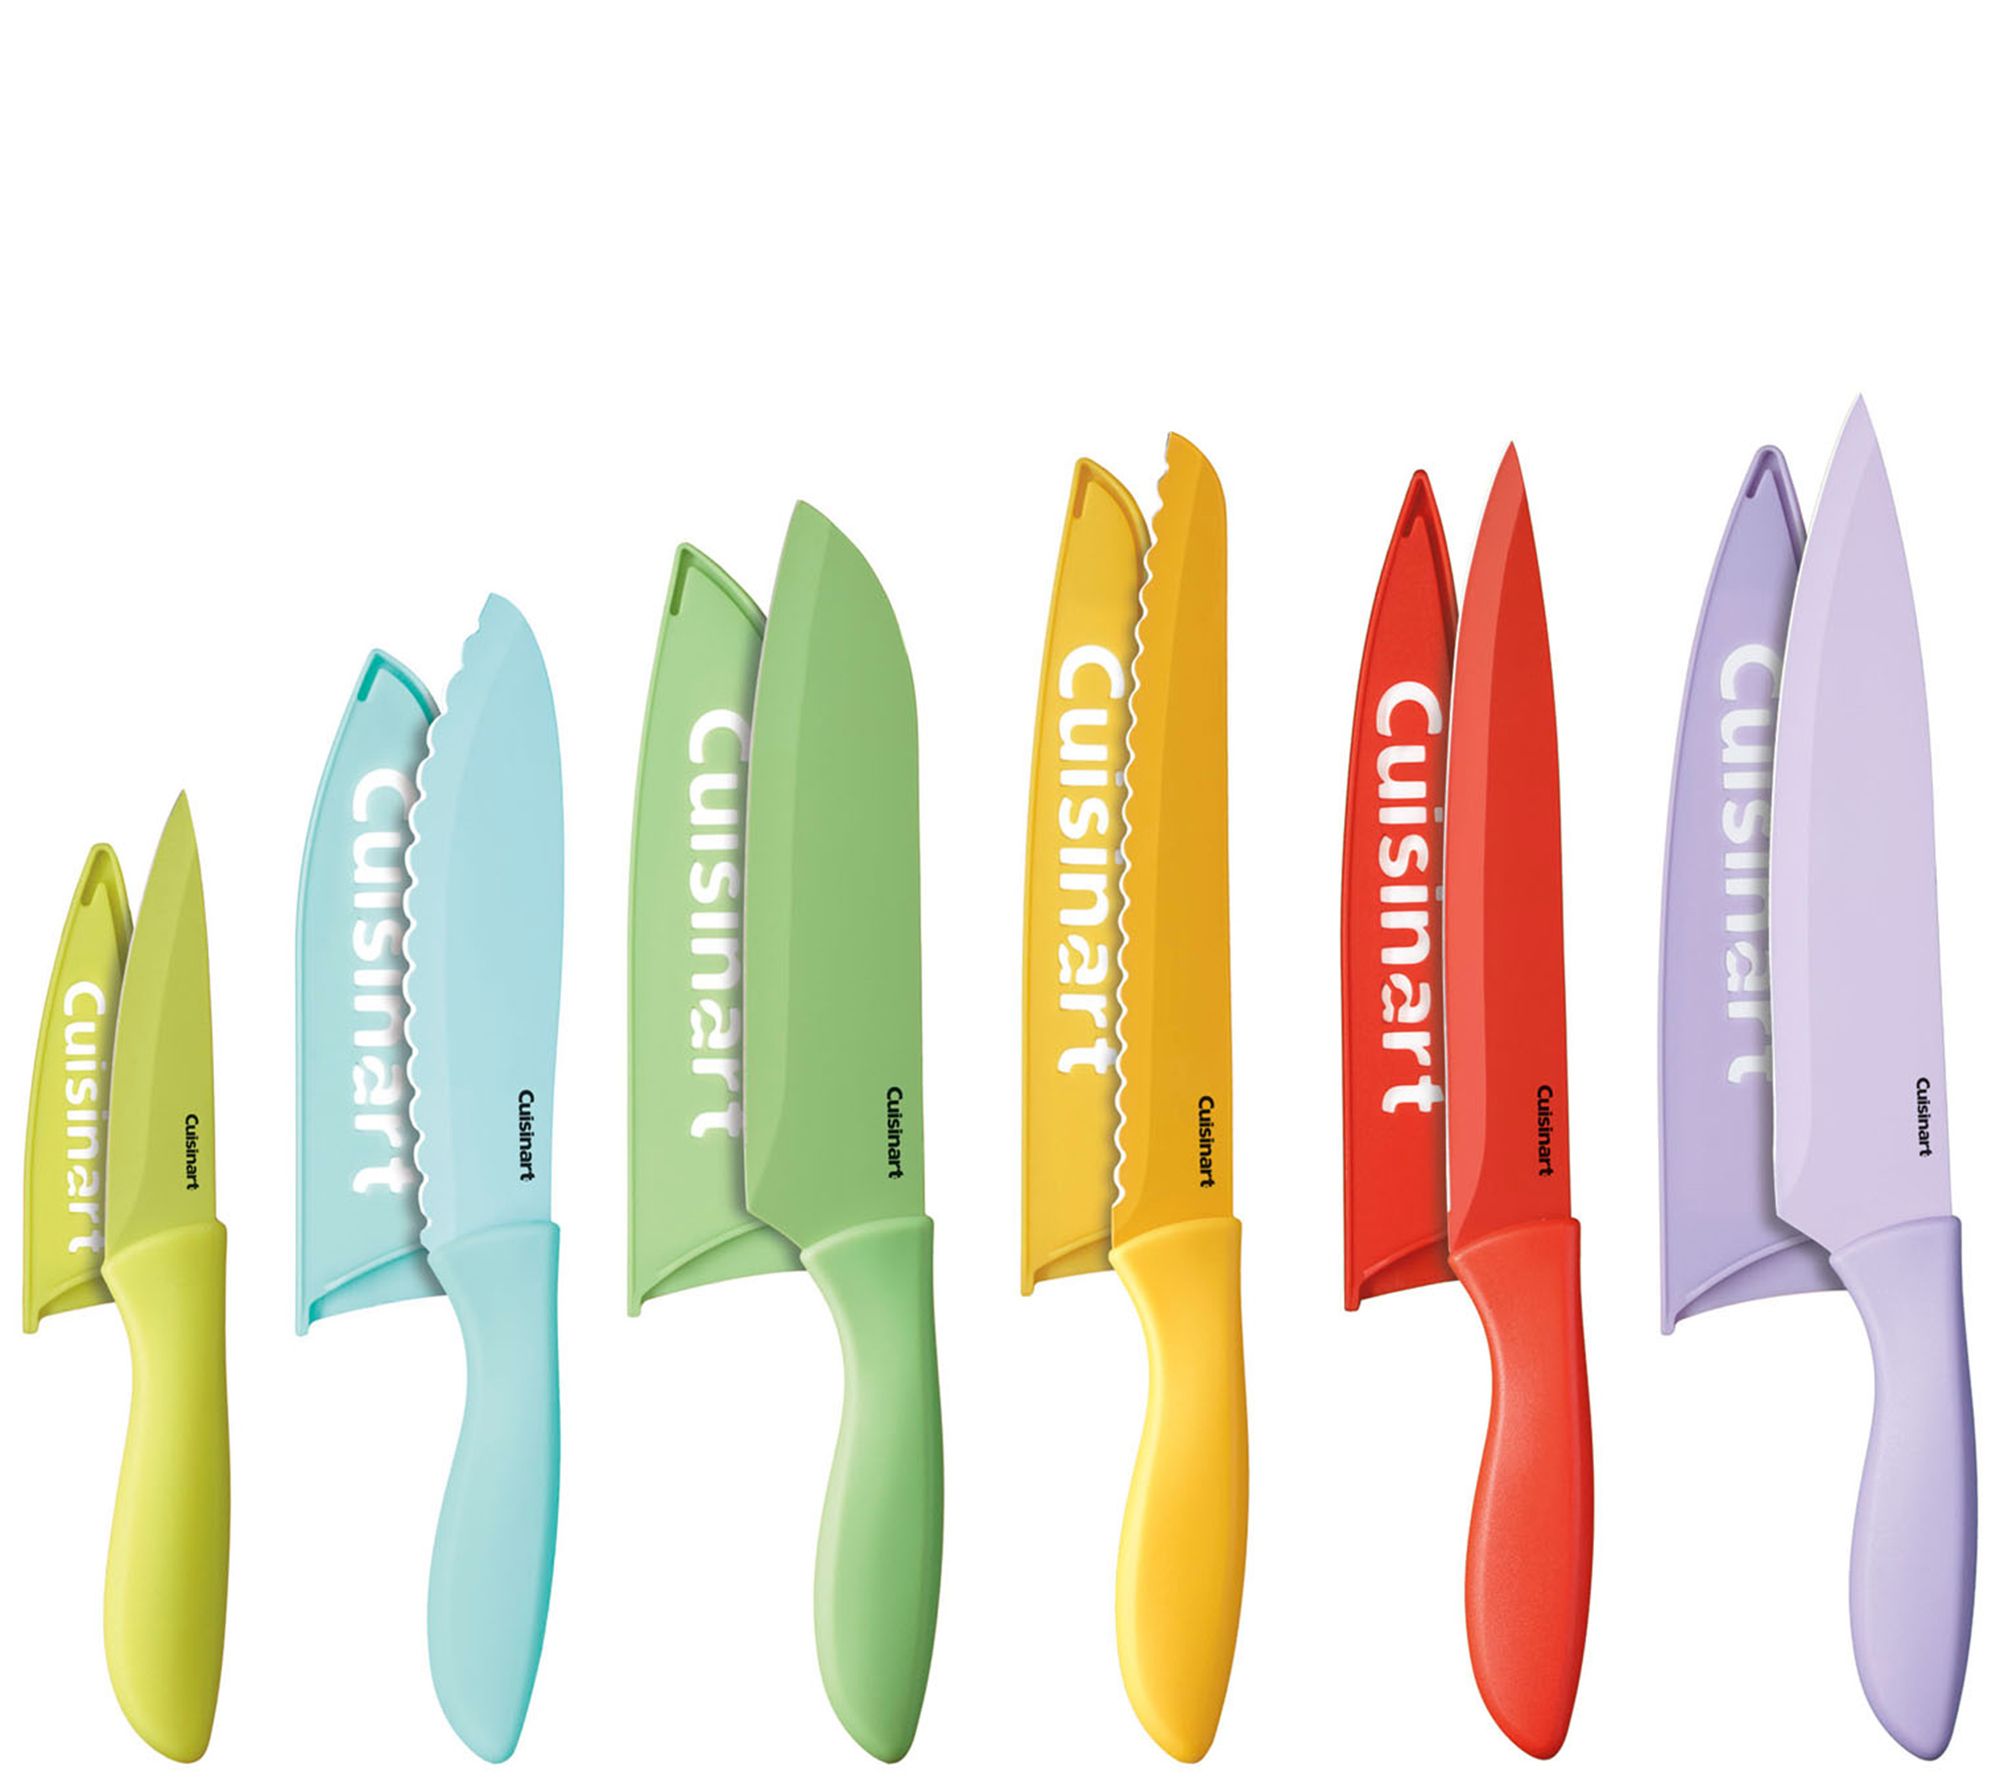 Cuisinart Cutlery 12 piece Ceramic Coated Printed Knife Set with